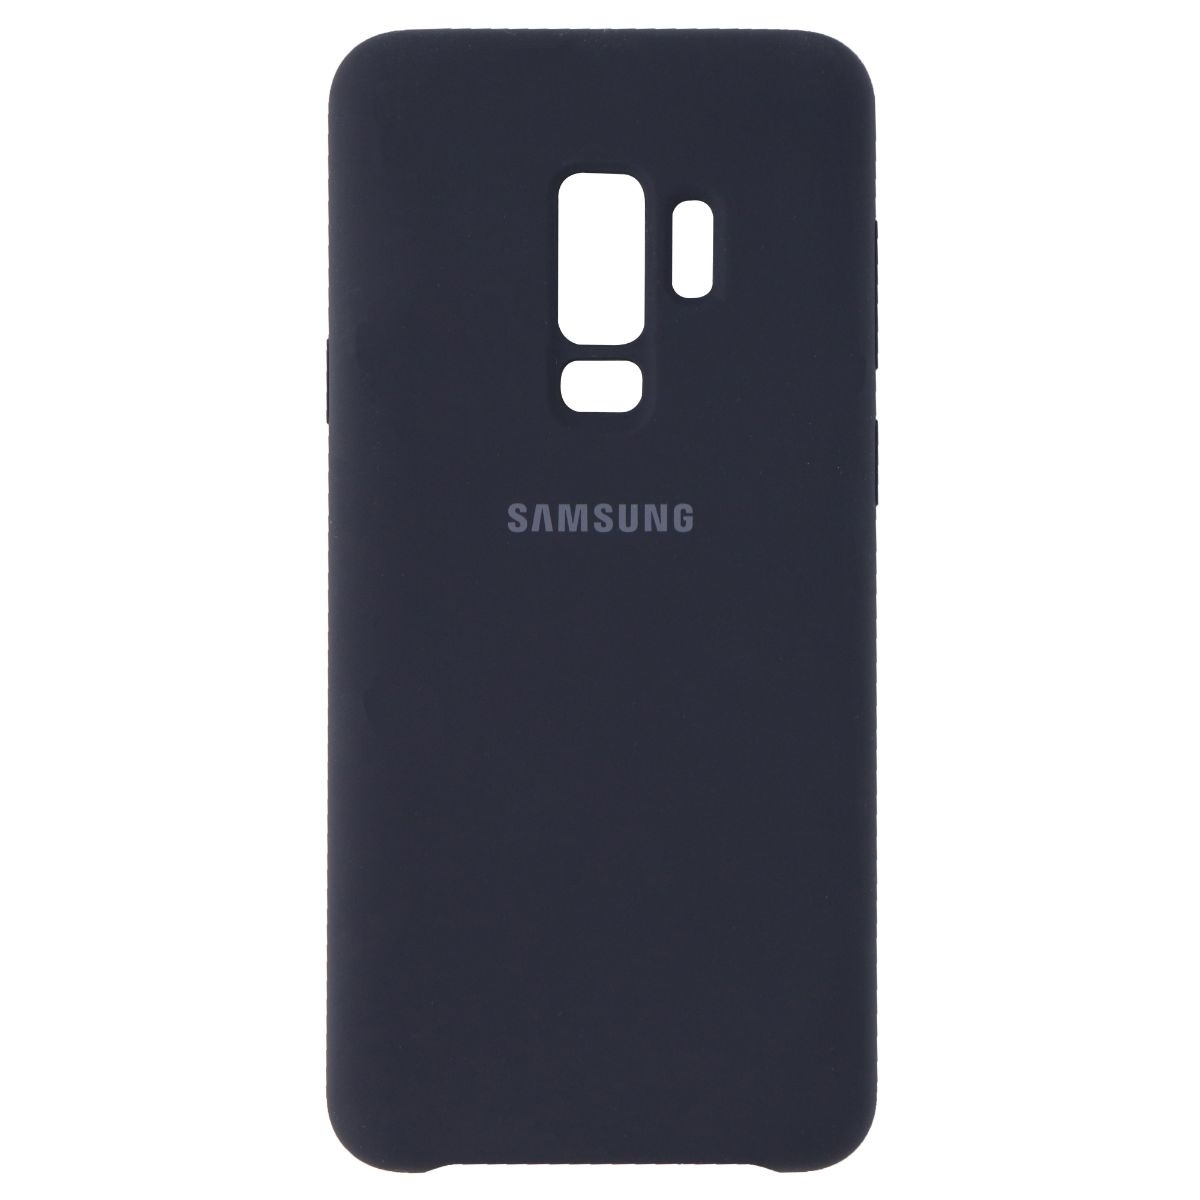 Official Samsung Silicone Protective Cover Case For Galaxy S9+ (Plus) - Black